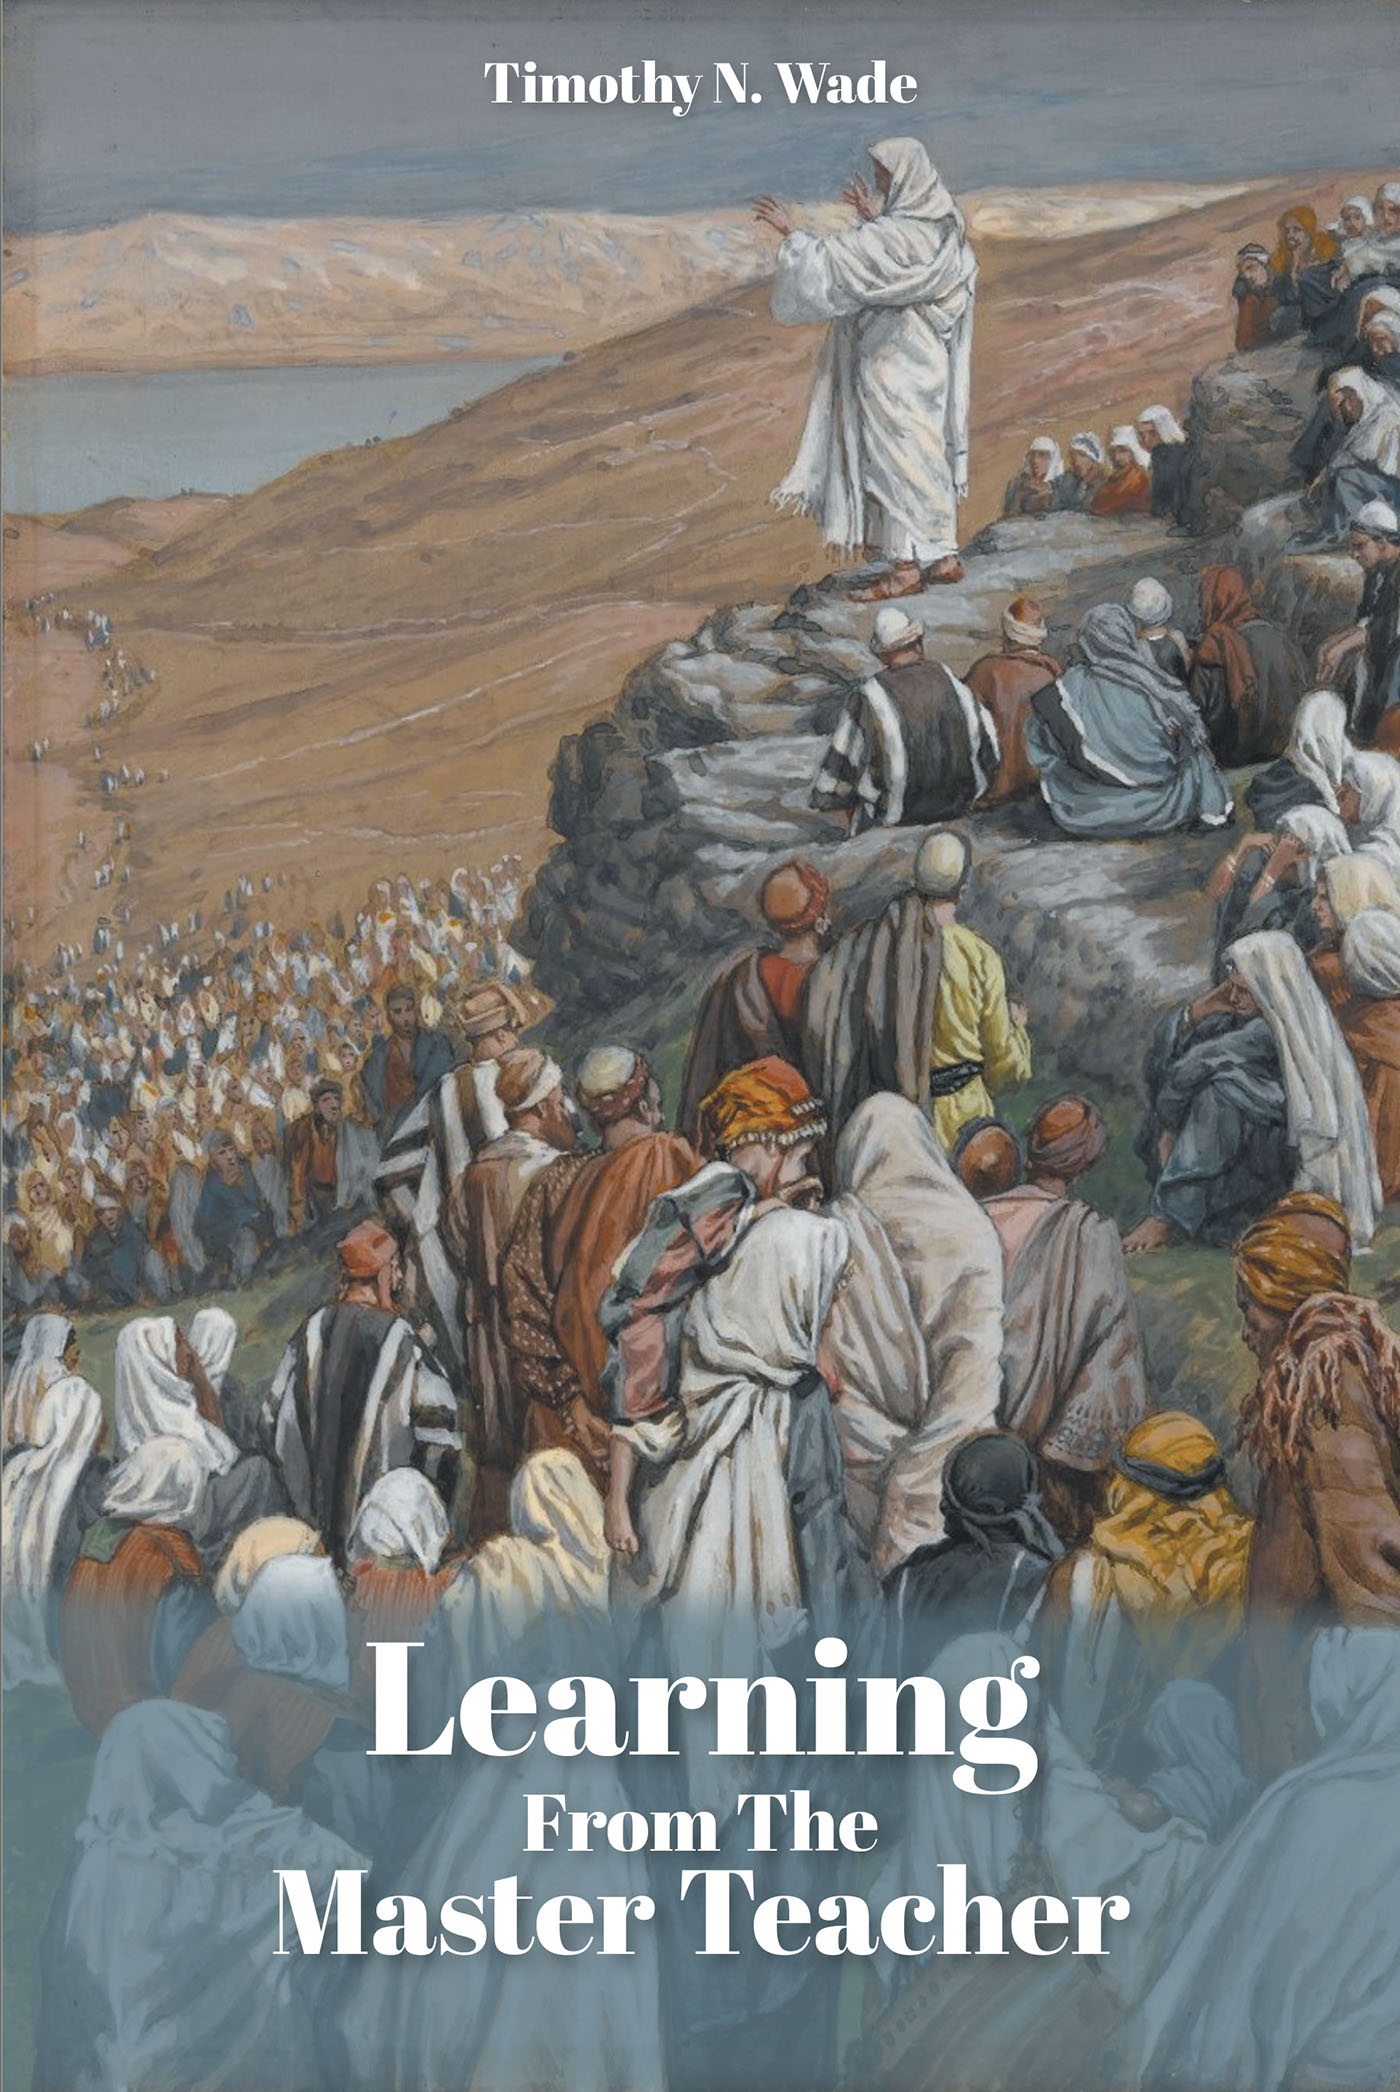 Author Timothy N. Wade’s New Book, "Learning from the Master Teacher," Offers Guidance to Readers Seeking to Learn from Jesus’s Divine Example